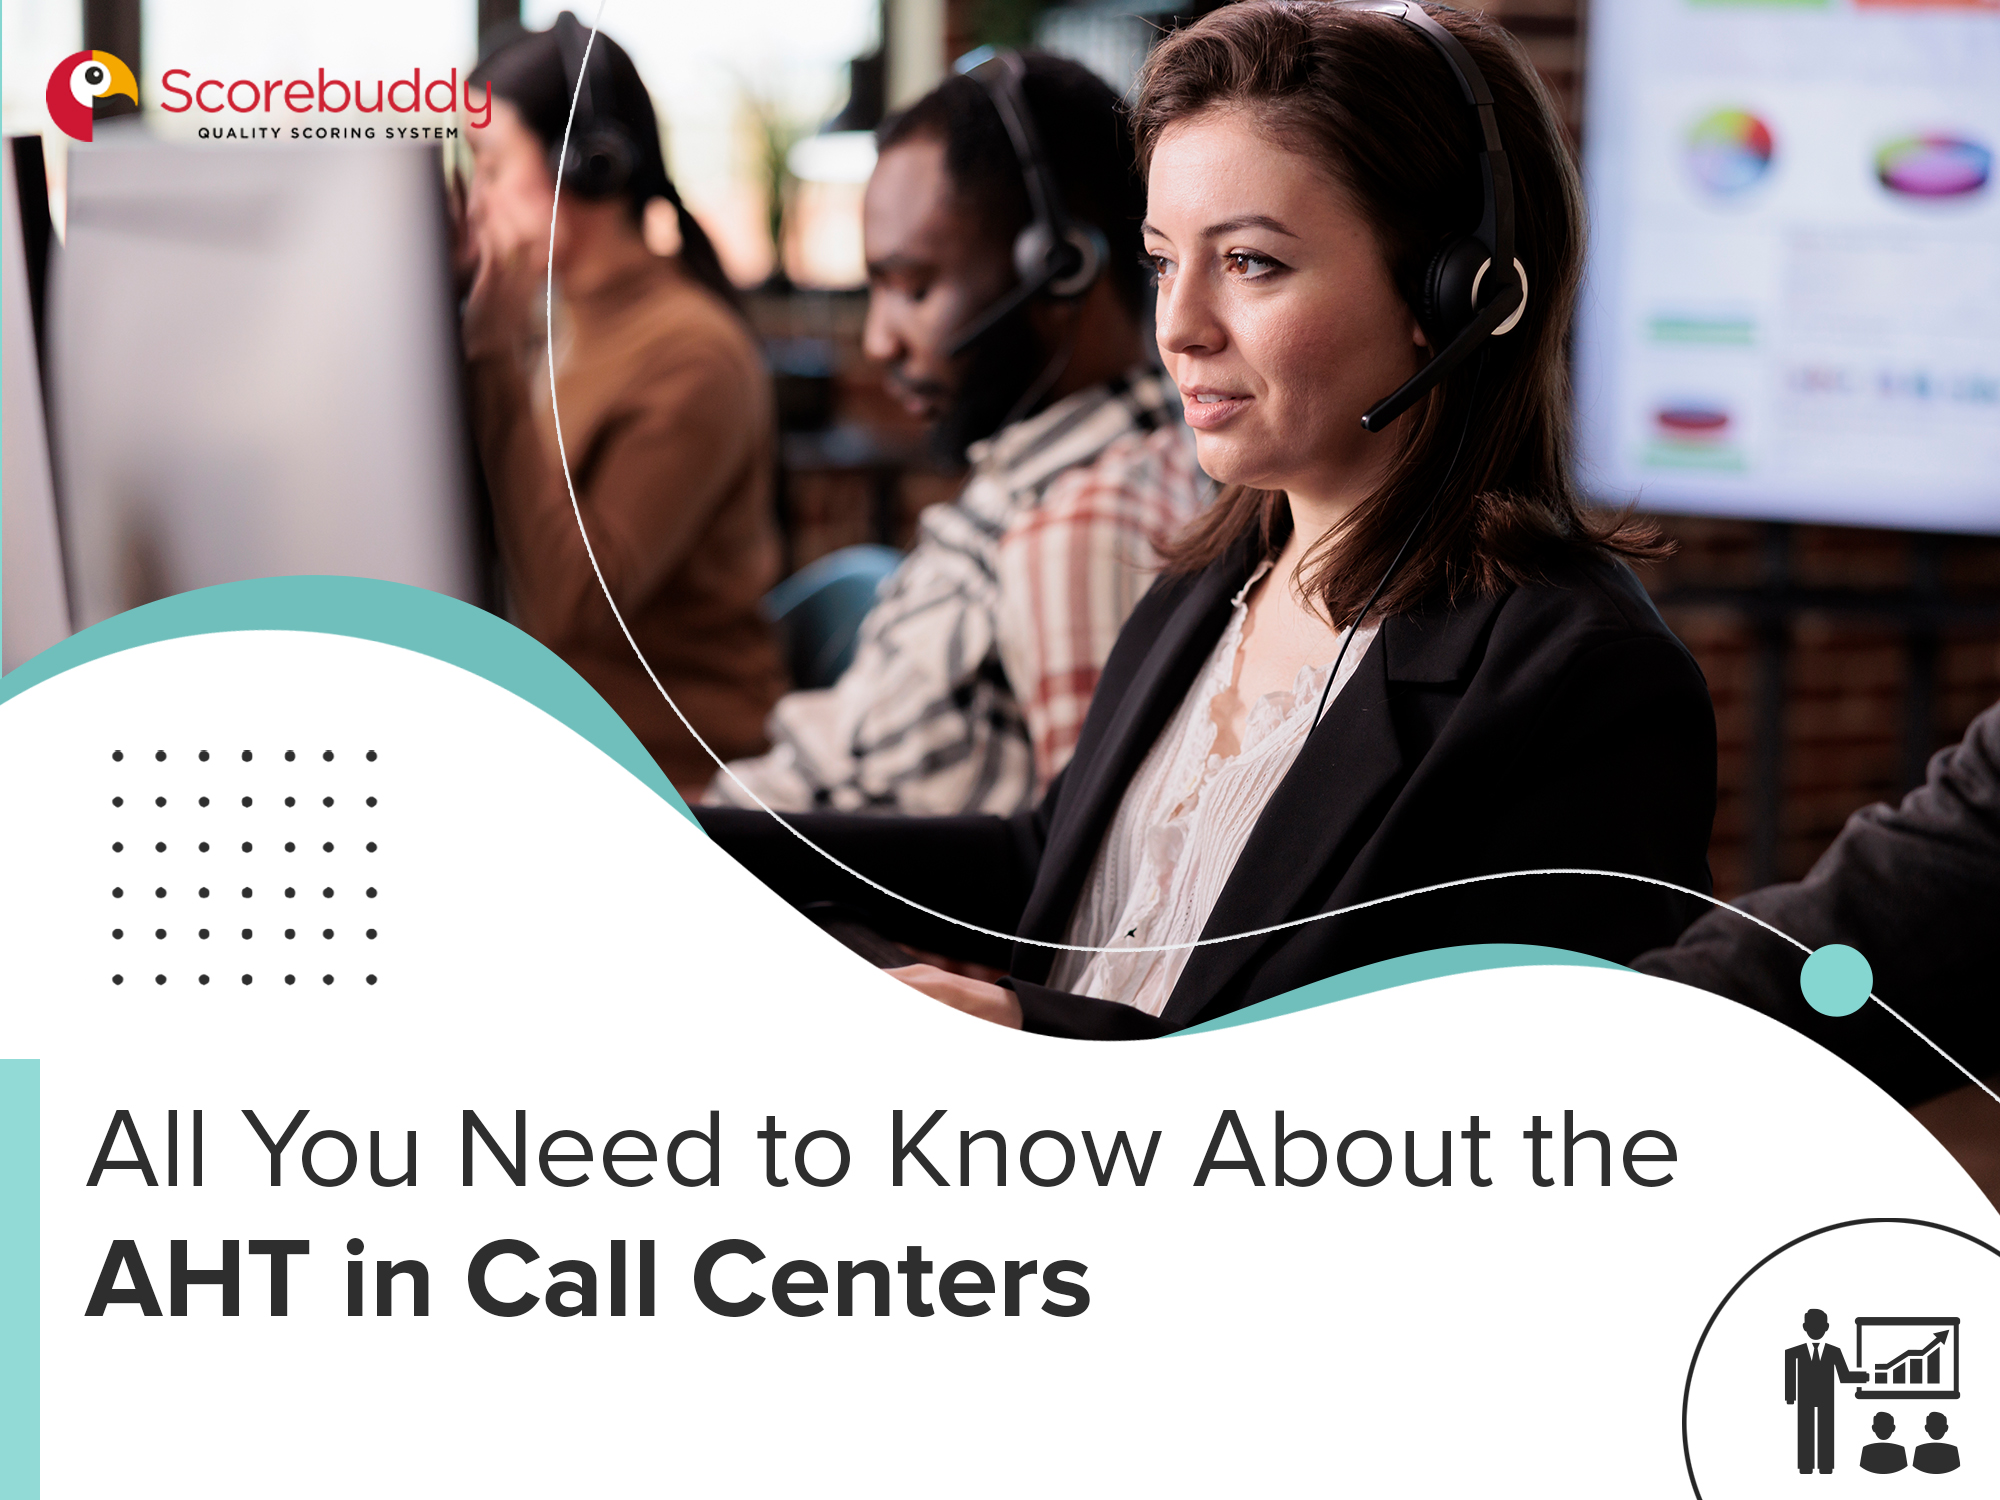 All You Need to Know About the AHT in Call Centers